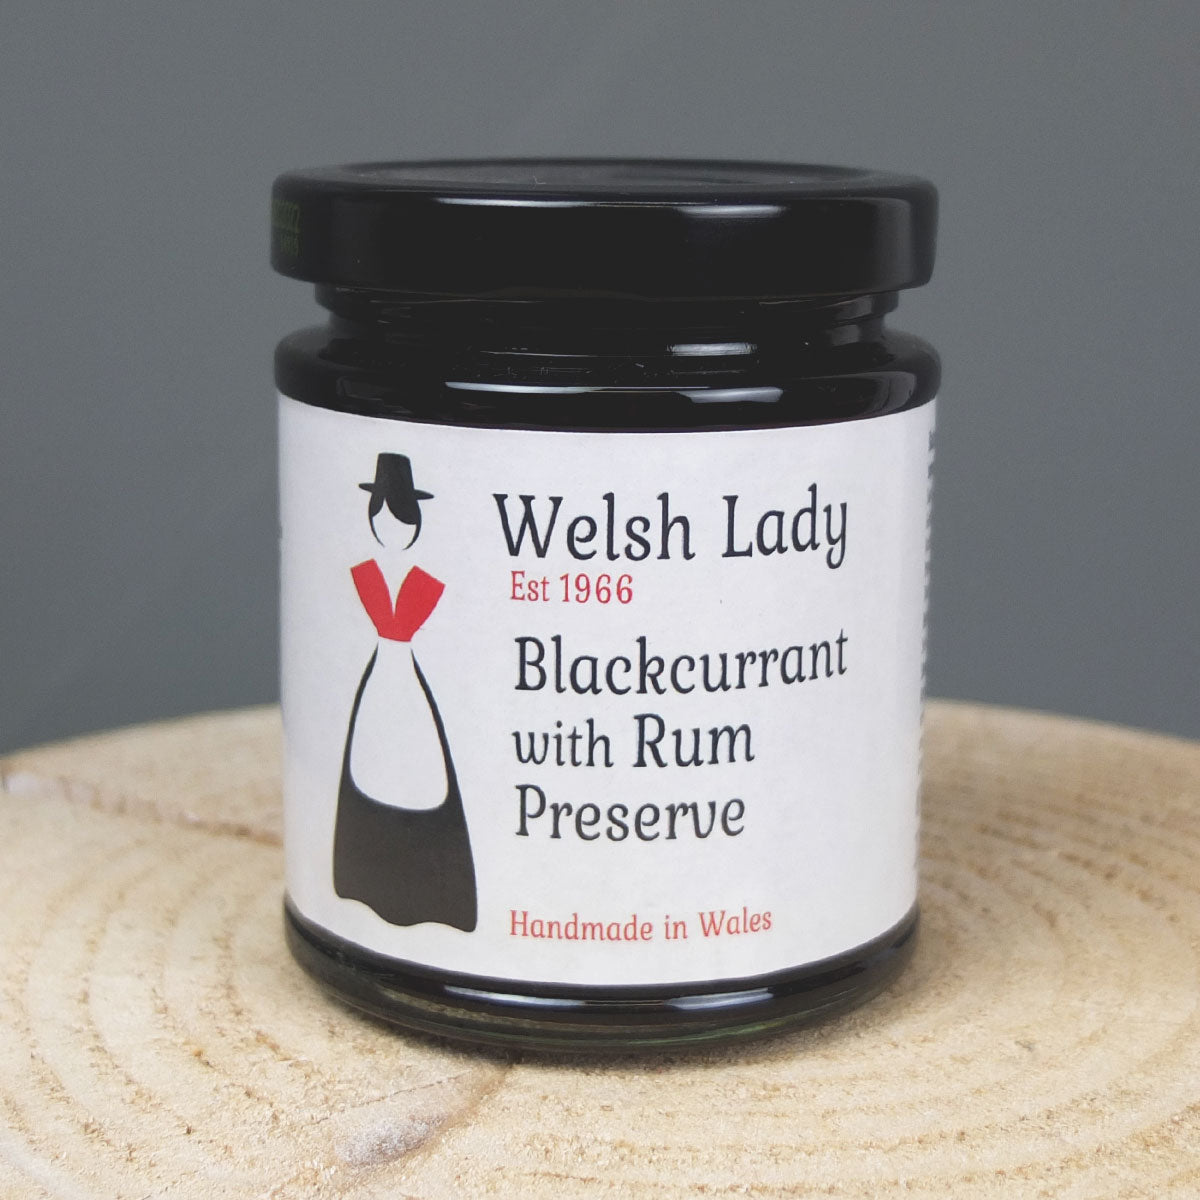 Blackcurrant and Rum Preserve by Welsh Lady Preserves